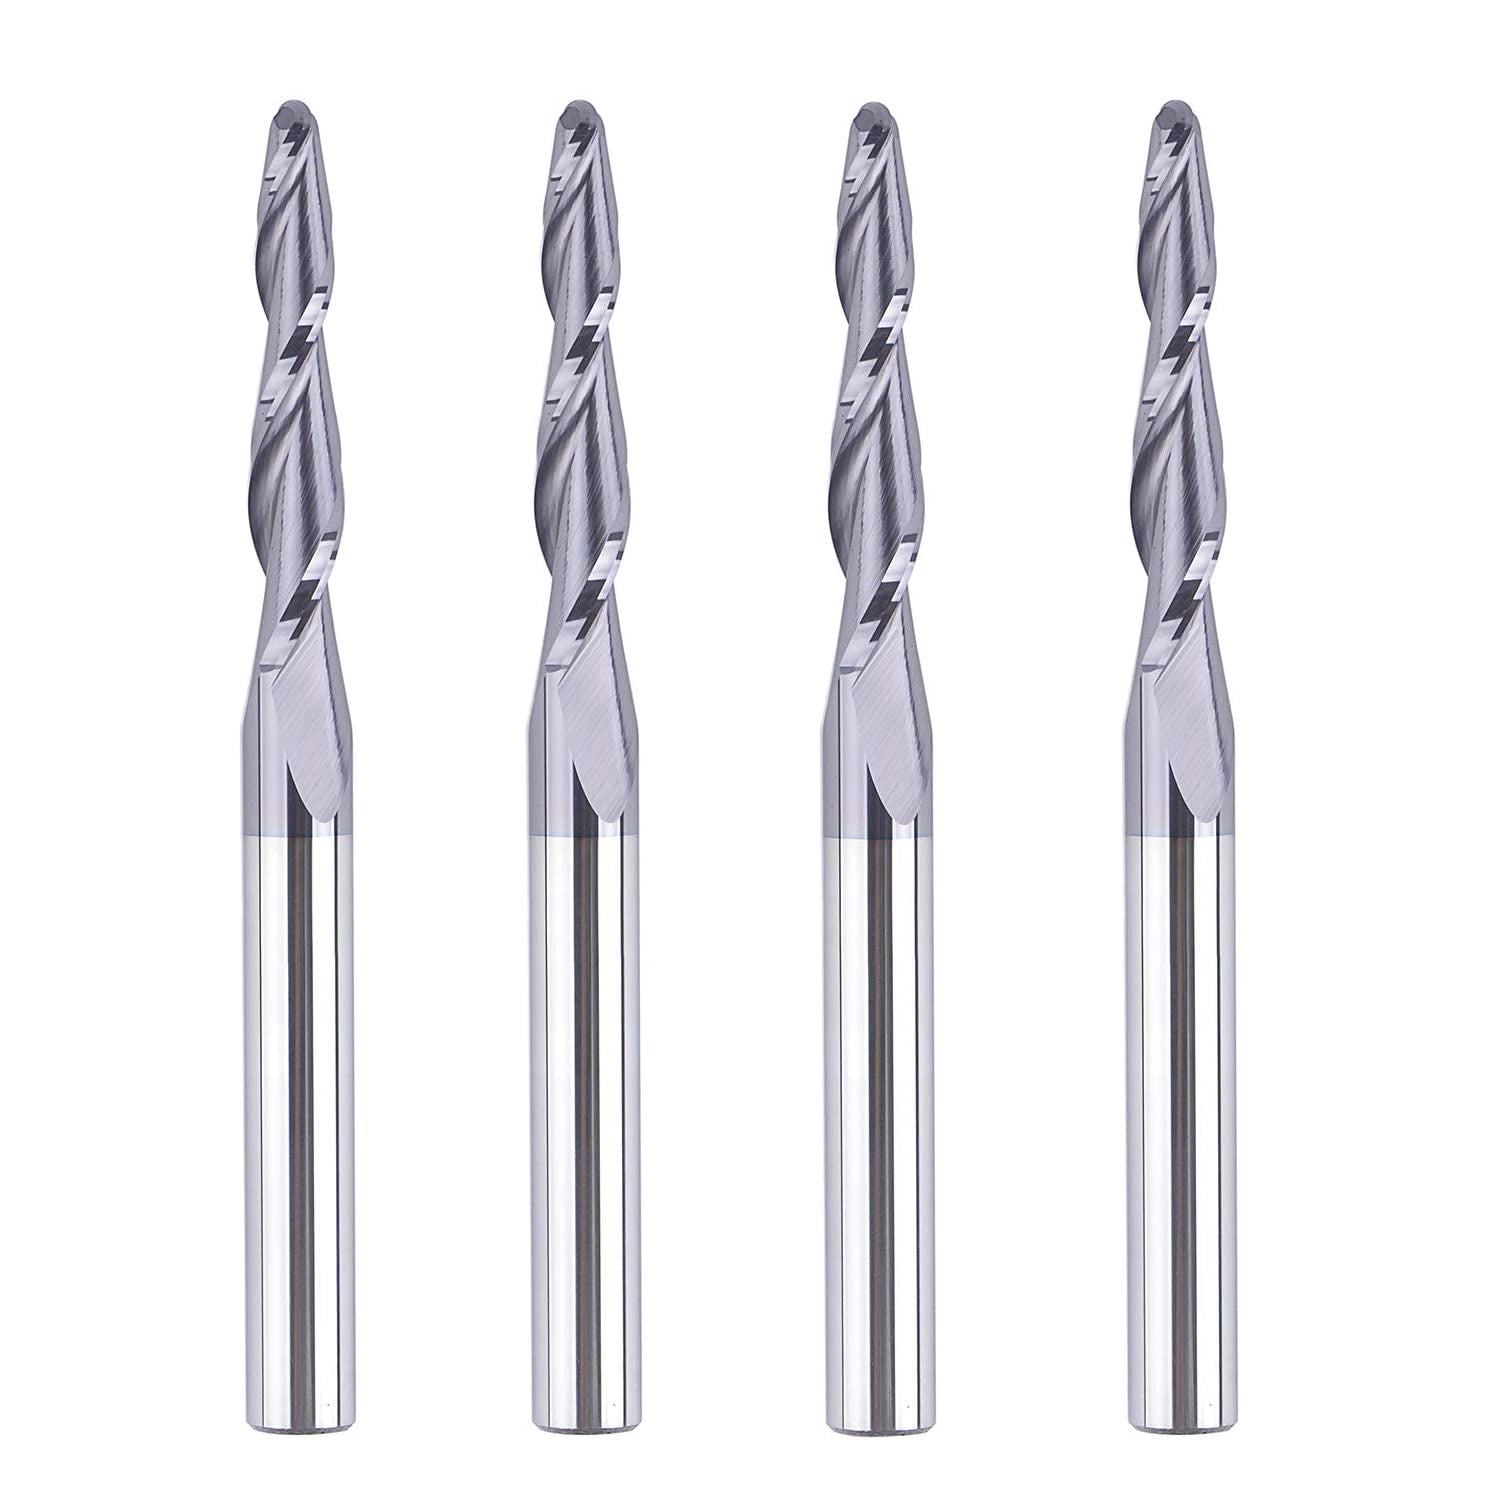 SpeTool W01017 CNC 2D and 3D Carving 2.2 Deg Tapered Angle Ball Nose 2.0mm Radius x 1/4" Shank x 1-1/4" Cutting Length x 3" Long 2 Flute SC TiAlN Coated Upcut Router Bit-10